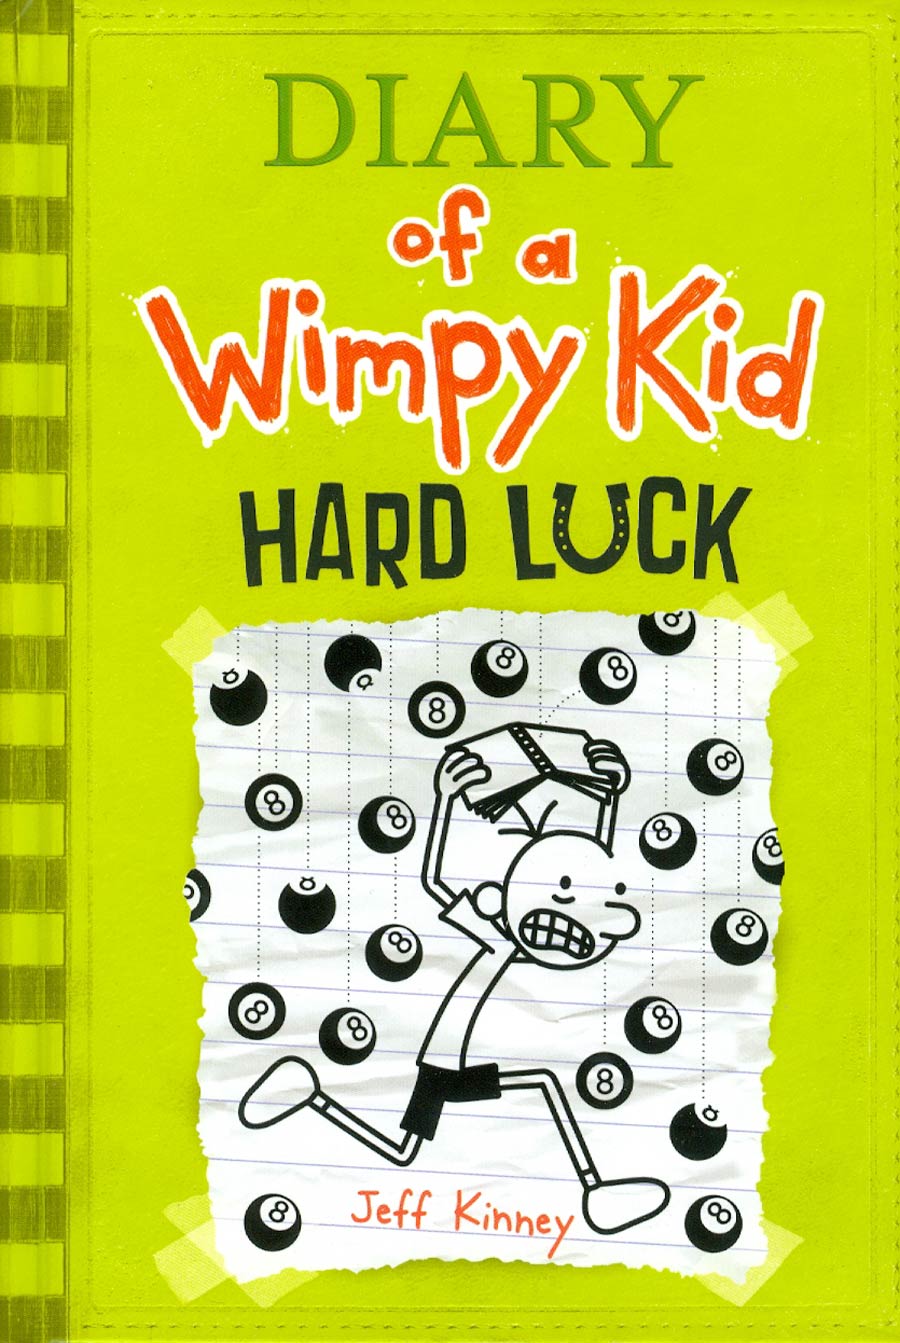 Diary Of A Wimpy Kid Vol 8 Hard Luck HC